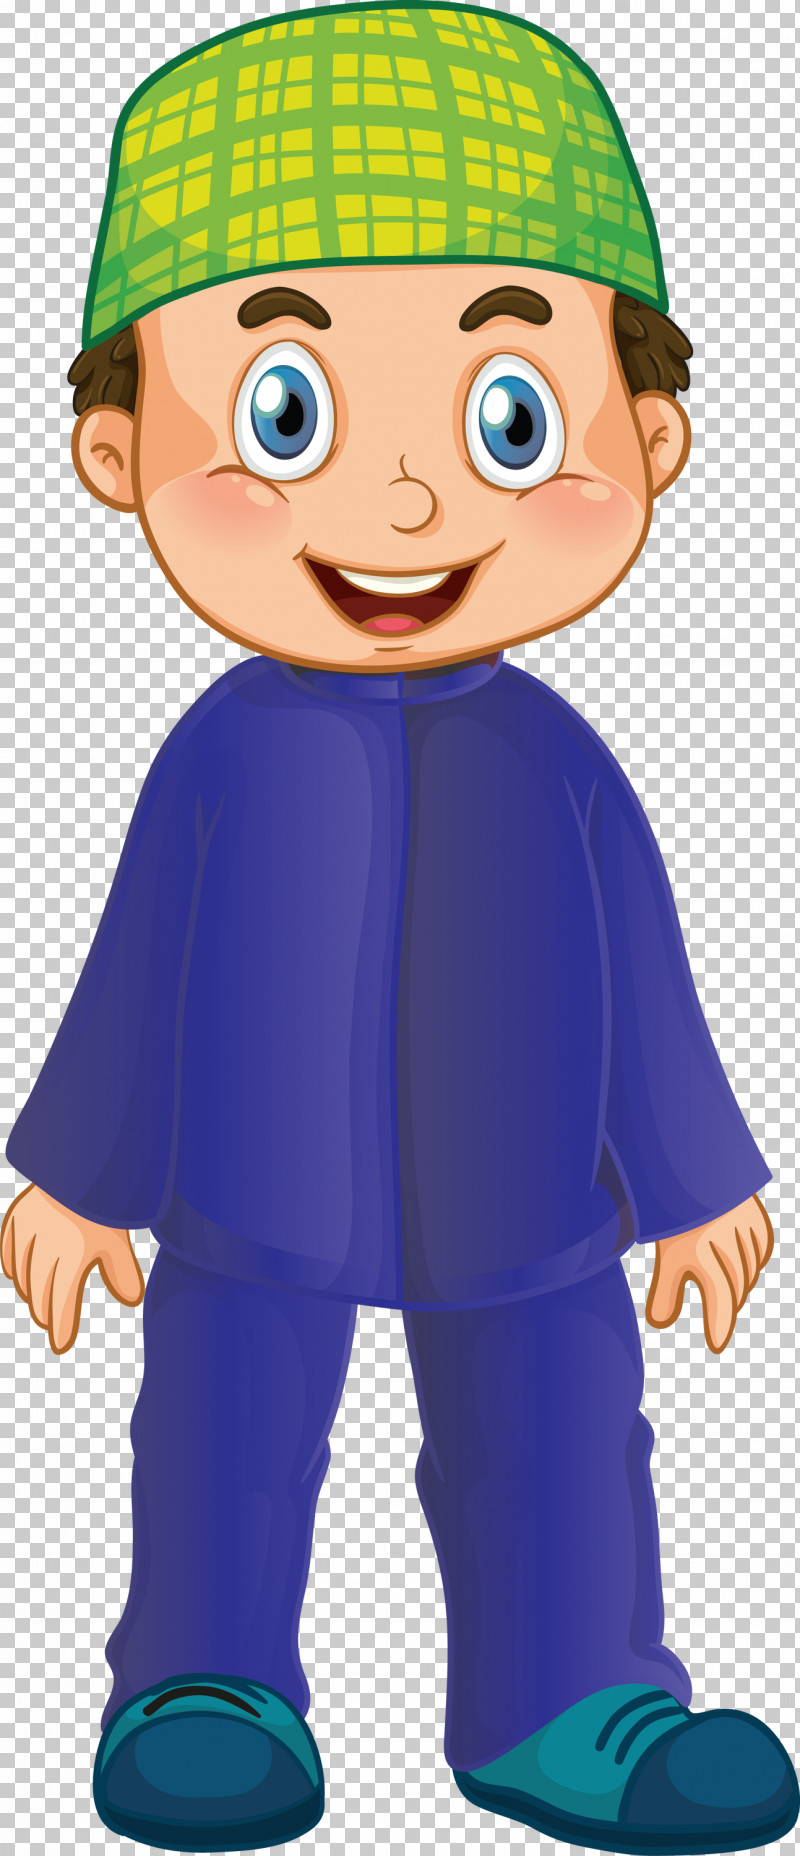 Muslim People PNG, Clipart, Animation, Cartoon, Child, Costume, Electric Blue Free PNG Download